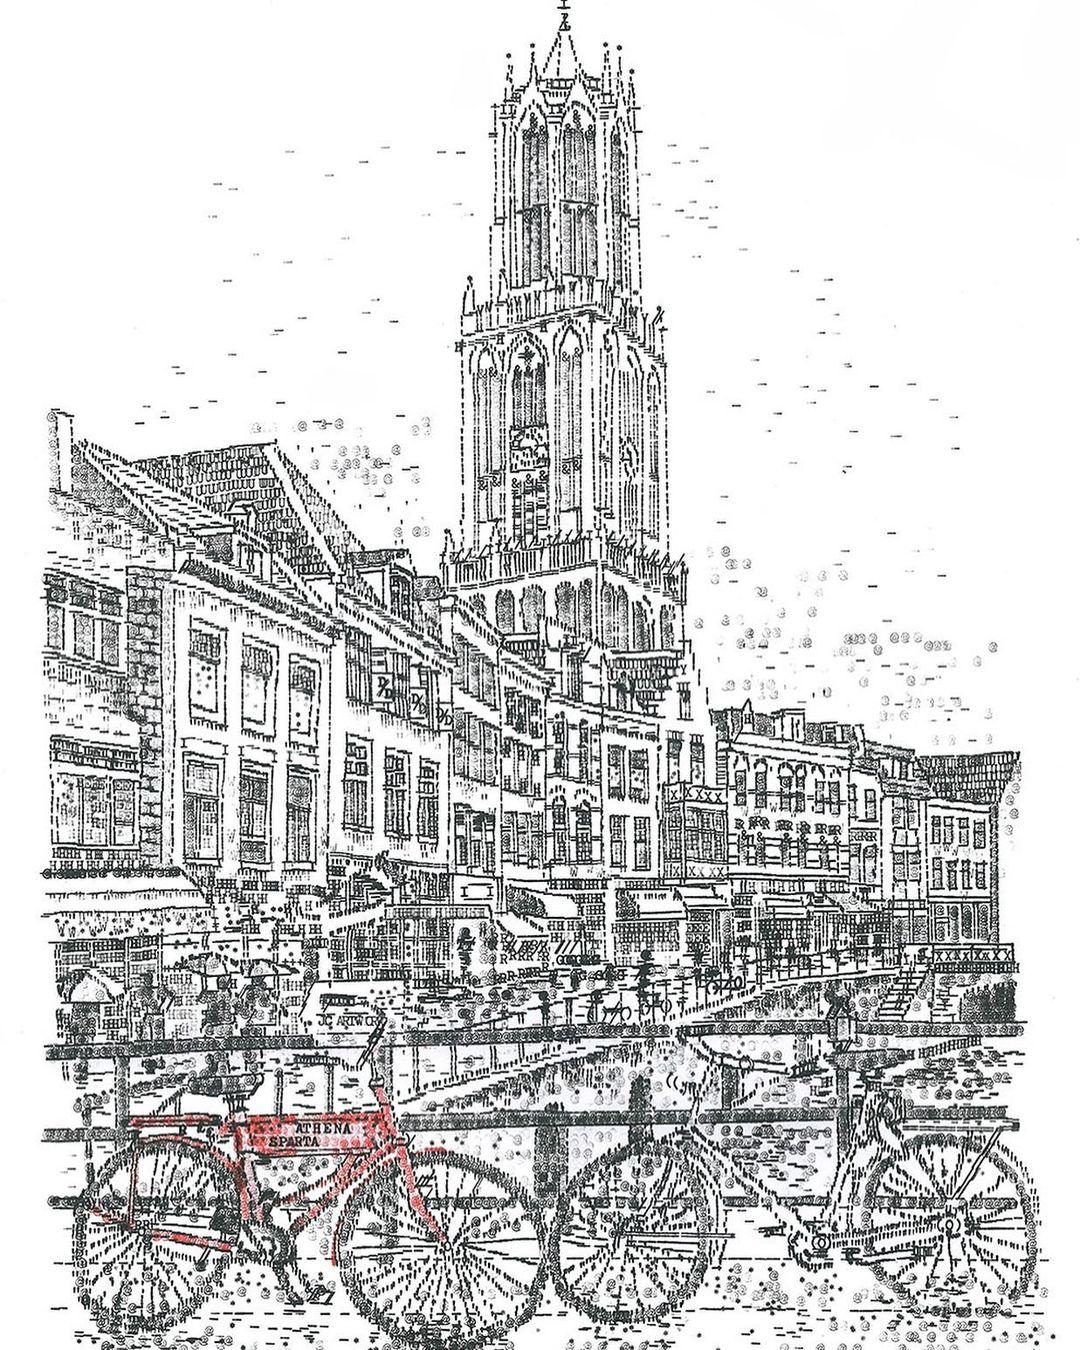 The drawing of the Dom Tower, Utrecht, Netherlands. It took under a week to complete on the 1973 Olympia SG3 A3 typewriter. (Courtesy of <a href="https://www.instagram.com/jamescookartwork/">James Cook Artwork</a>)